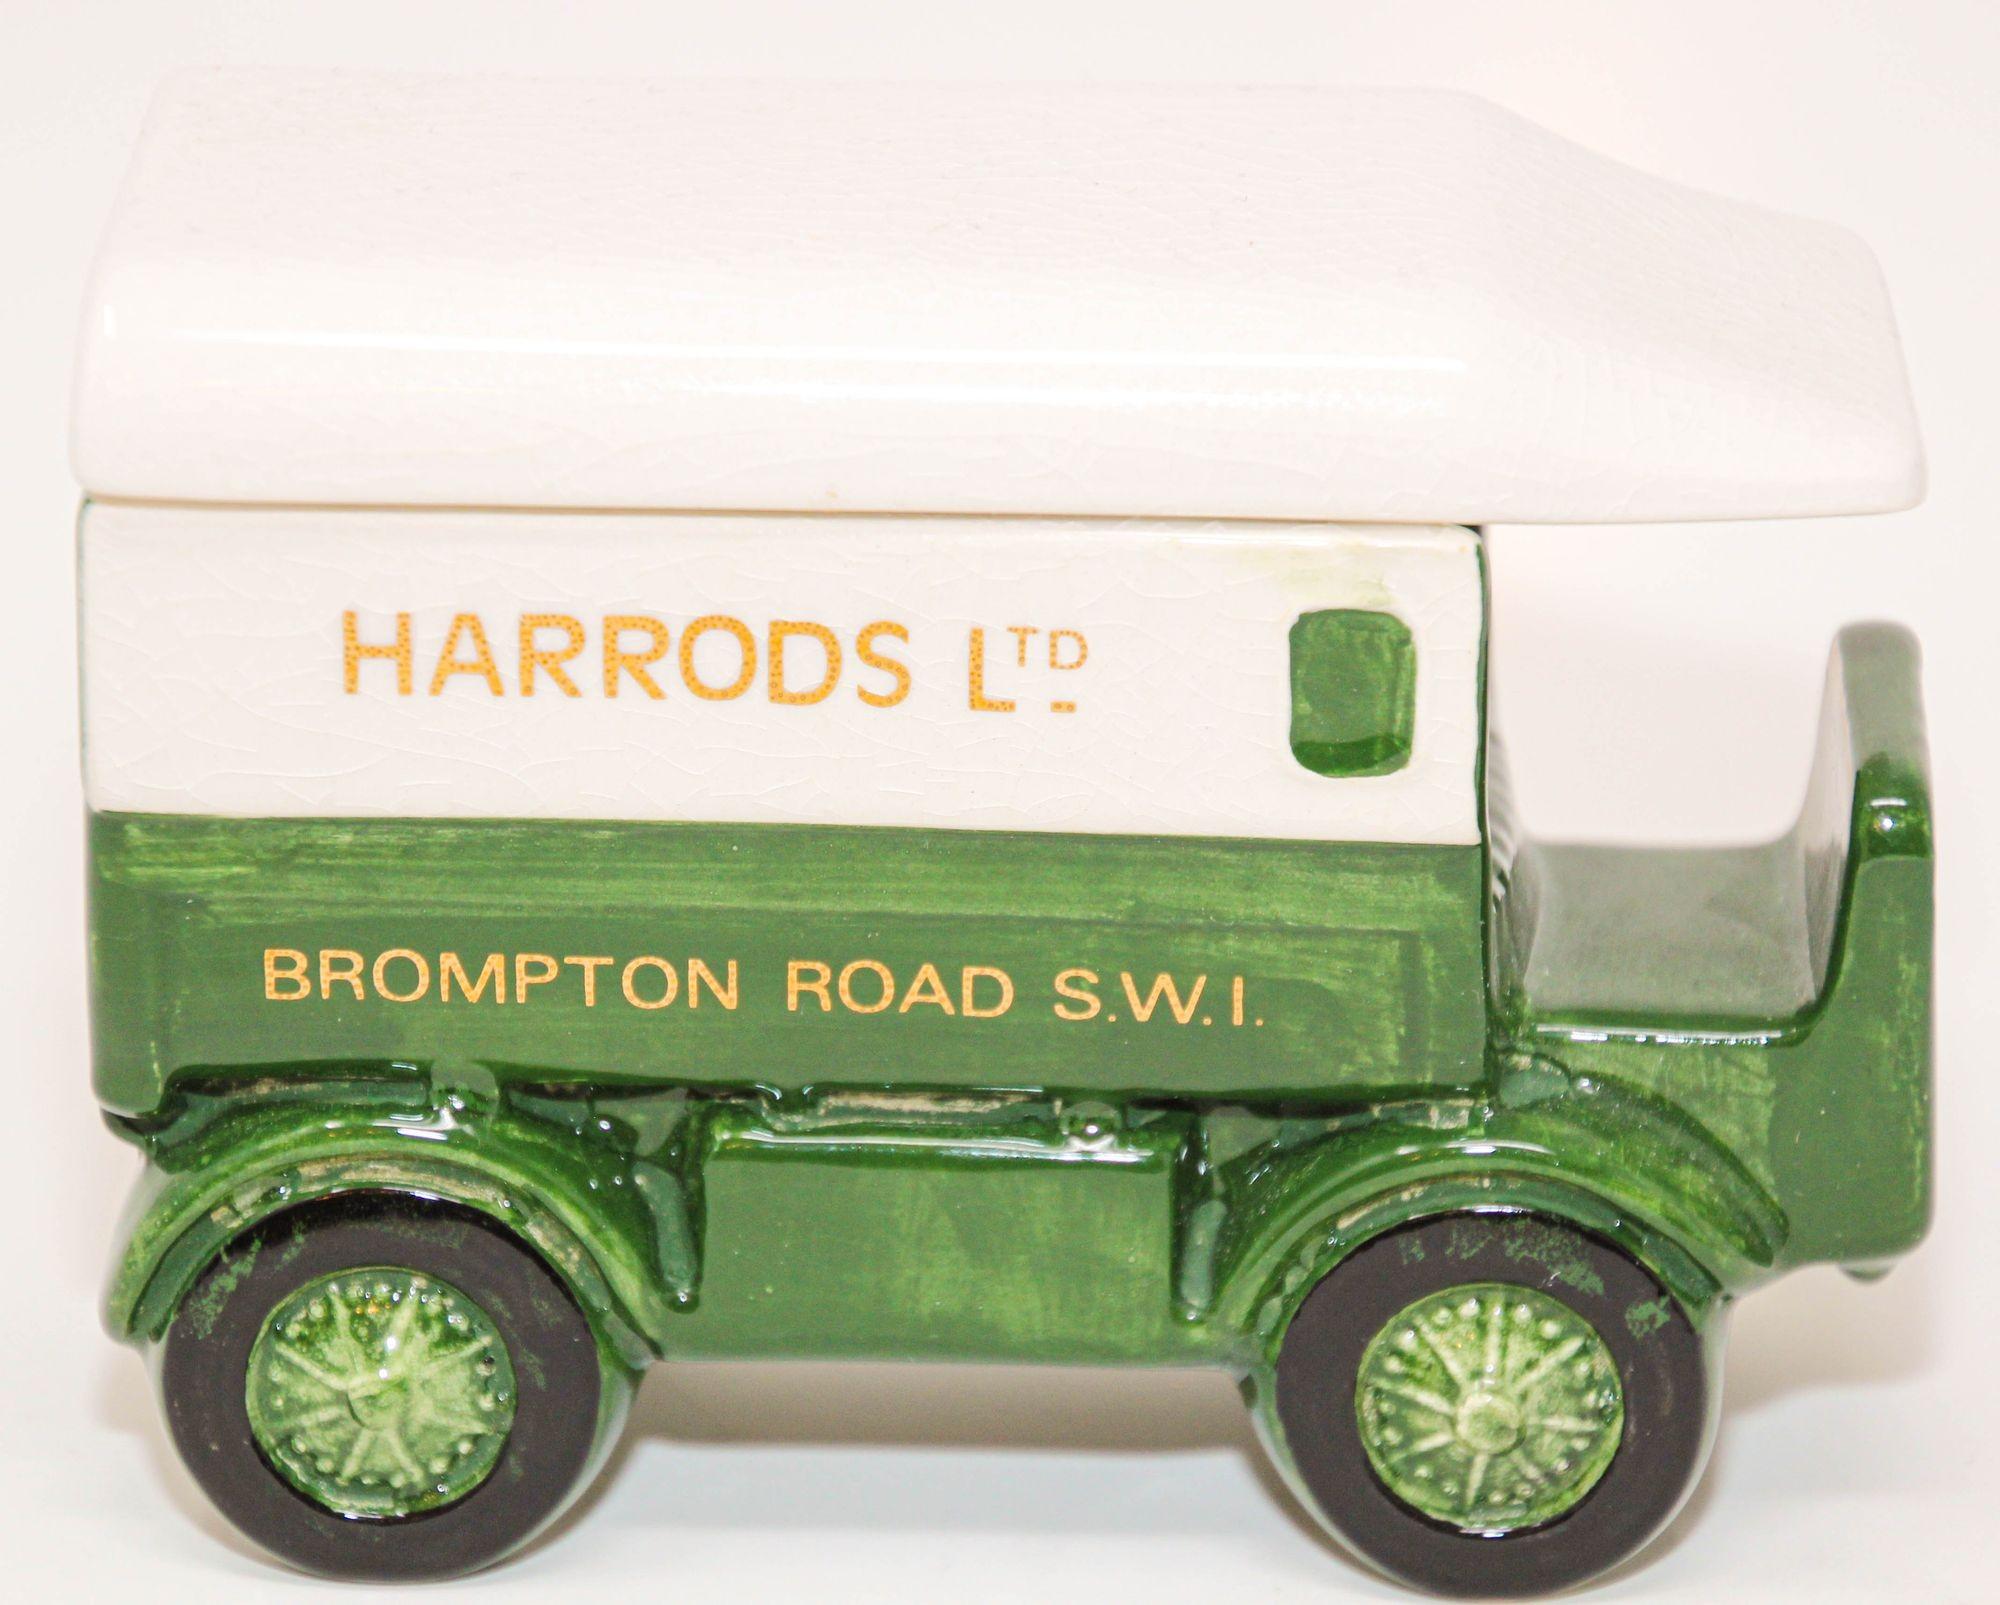 Harrods ceramic delivery truck, lidded candy or trinket box, London, England.
Hand painted ceramic small tea caddy box, trinket truck box.
Vintage Harrods Ltd London Pottery Lidded Van Truck Tea Caddy Trinket Key Box.
This ceramic truck with lid